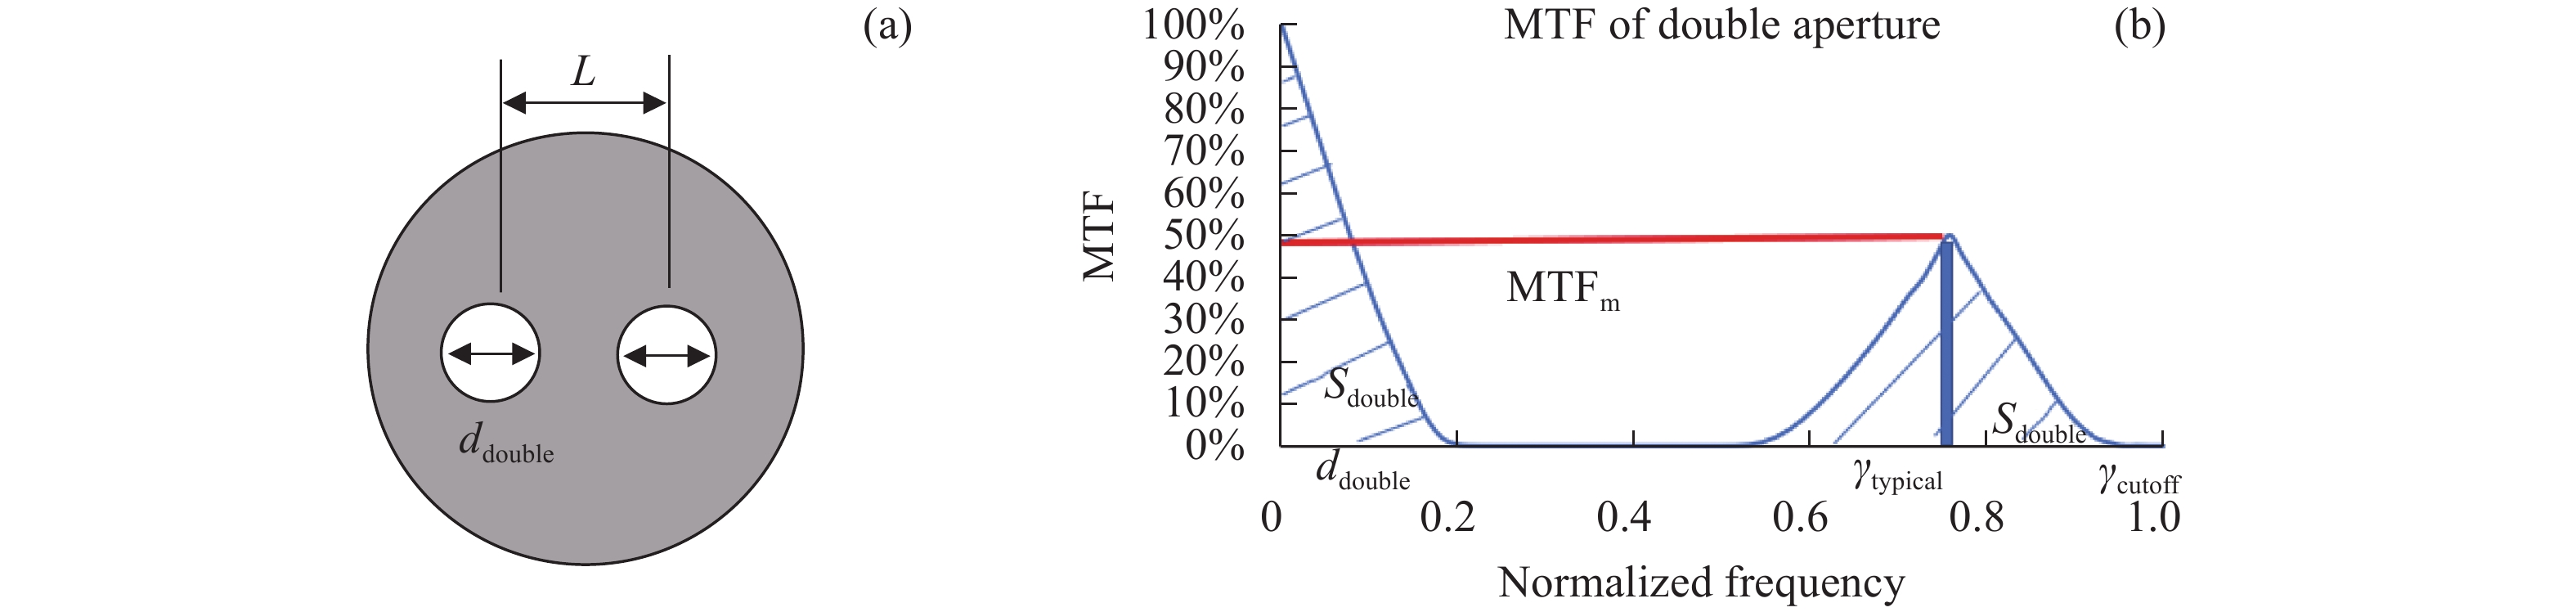 Double-aperture and its MTF